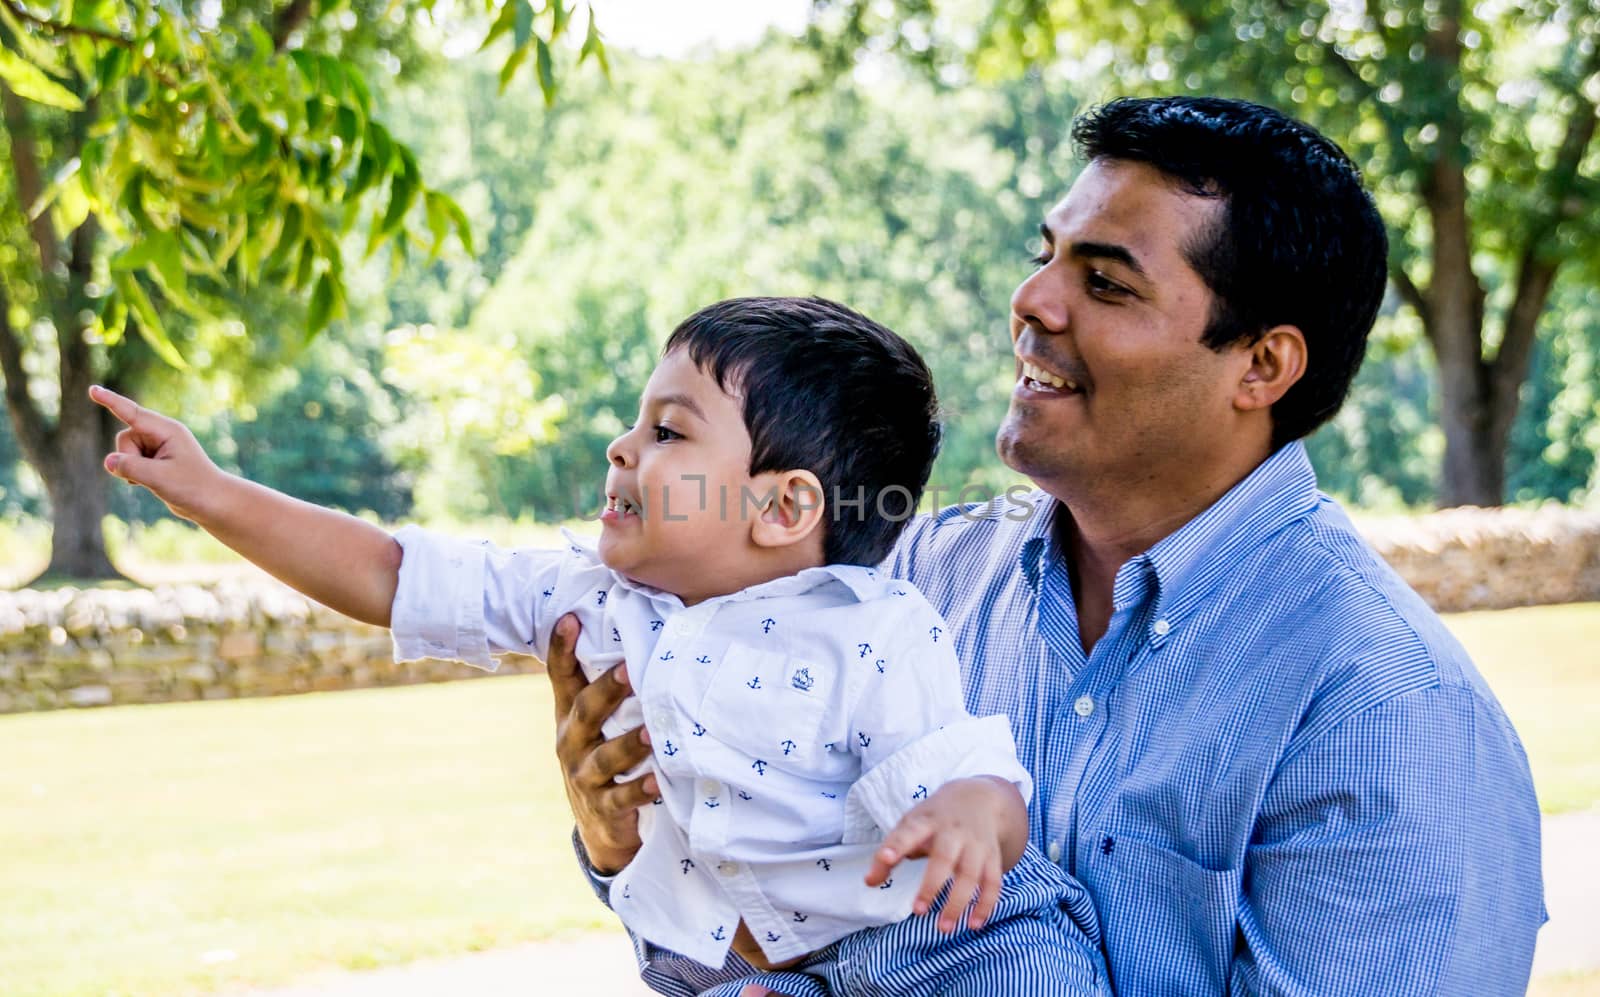 Latino father holding his son outside in a park with trees in the background. The boy is pointing at something in the distance and the father is smiling.